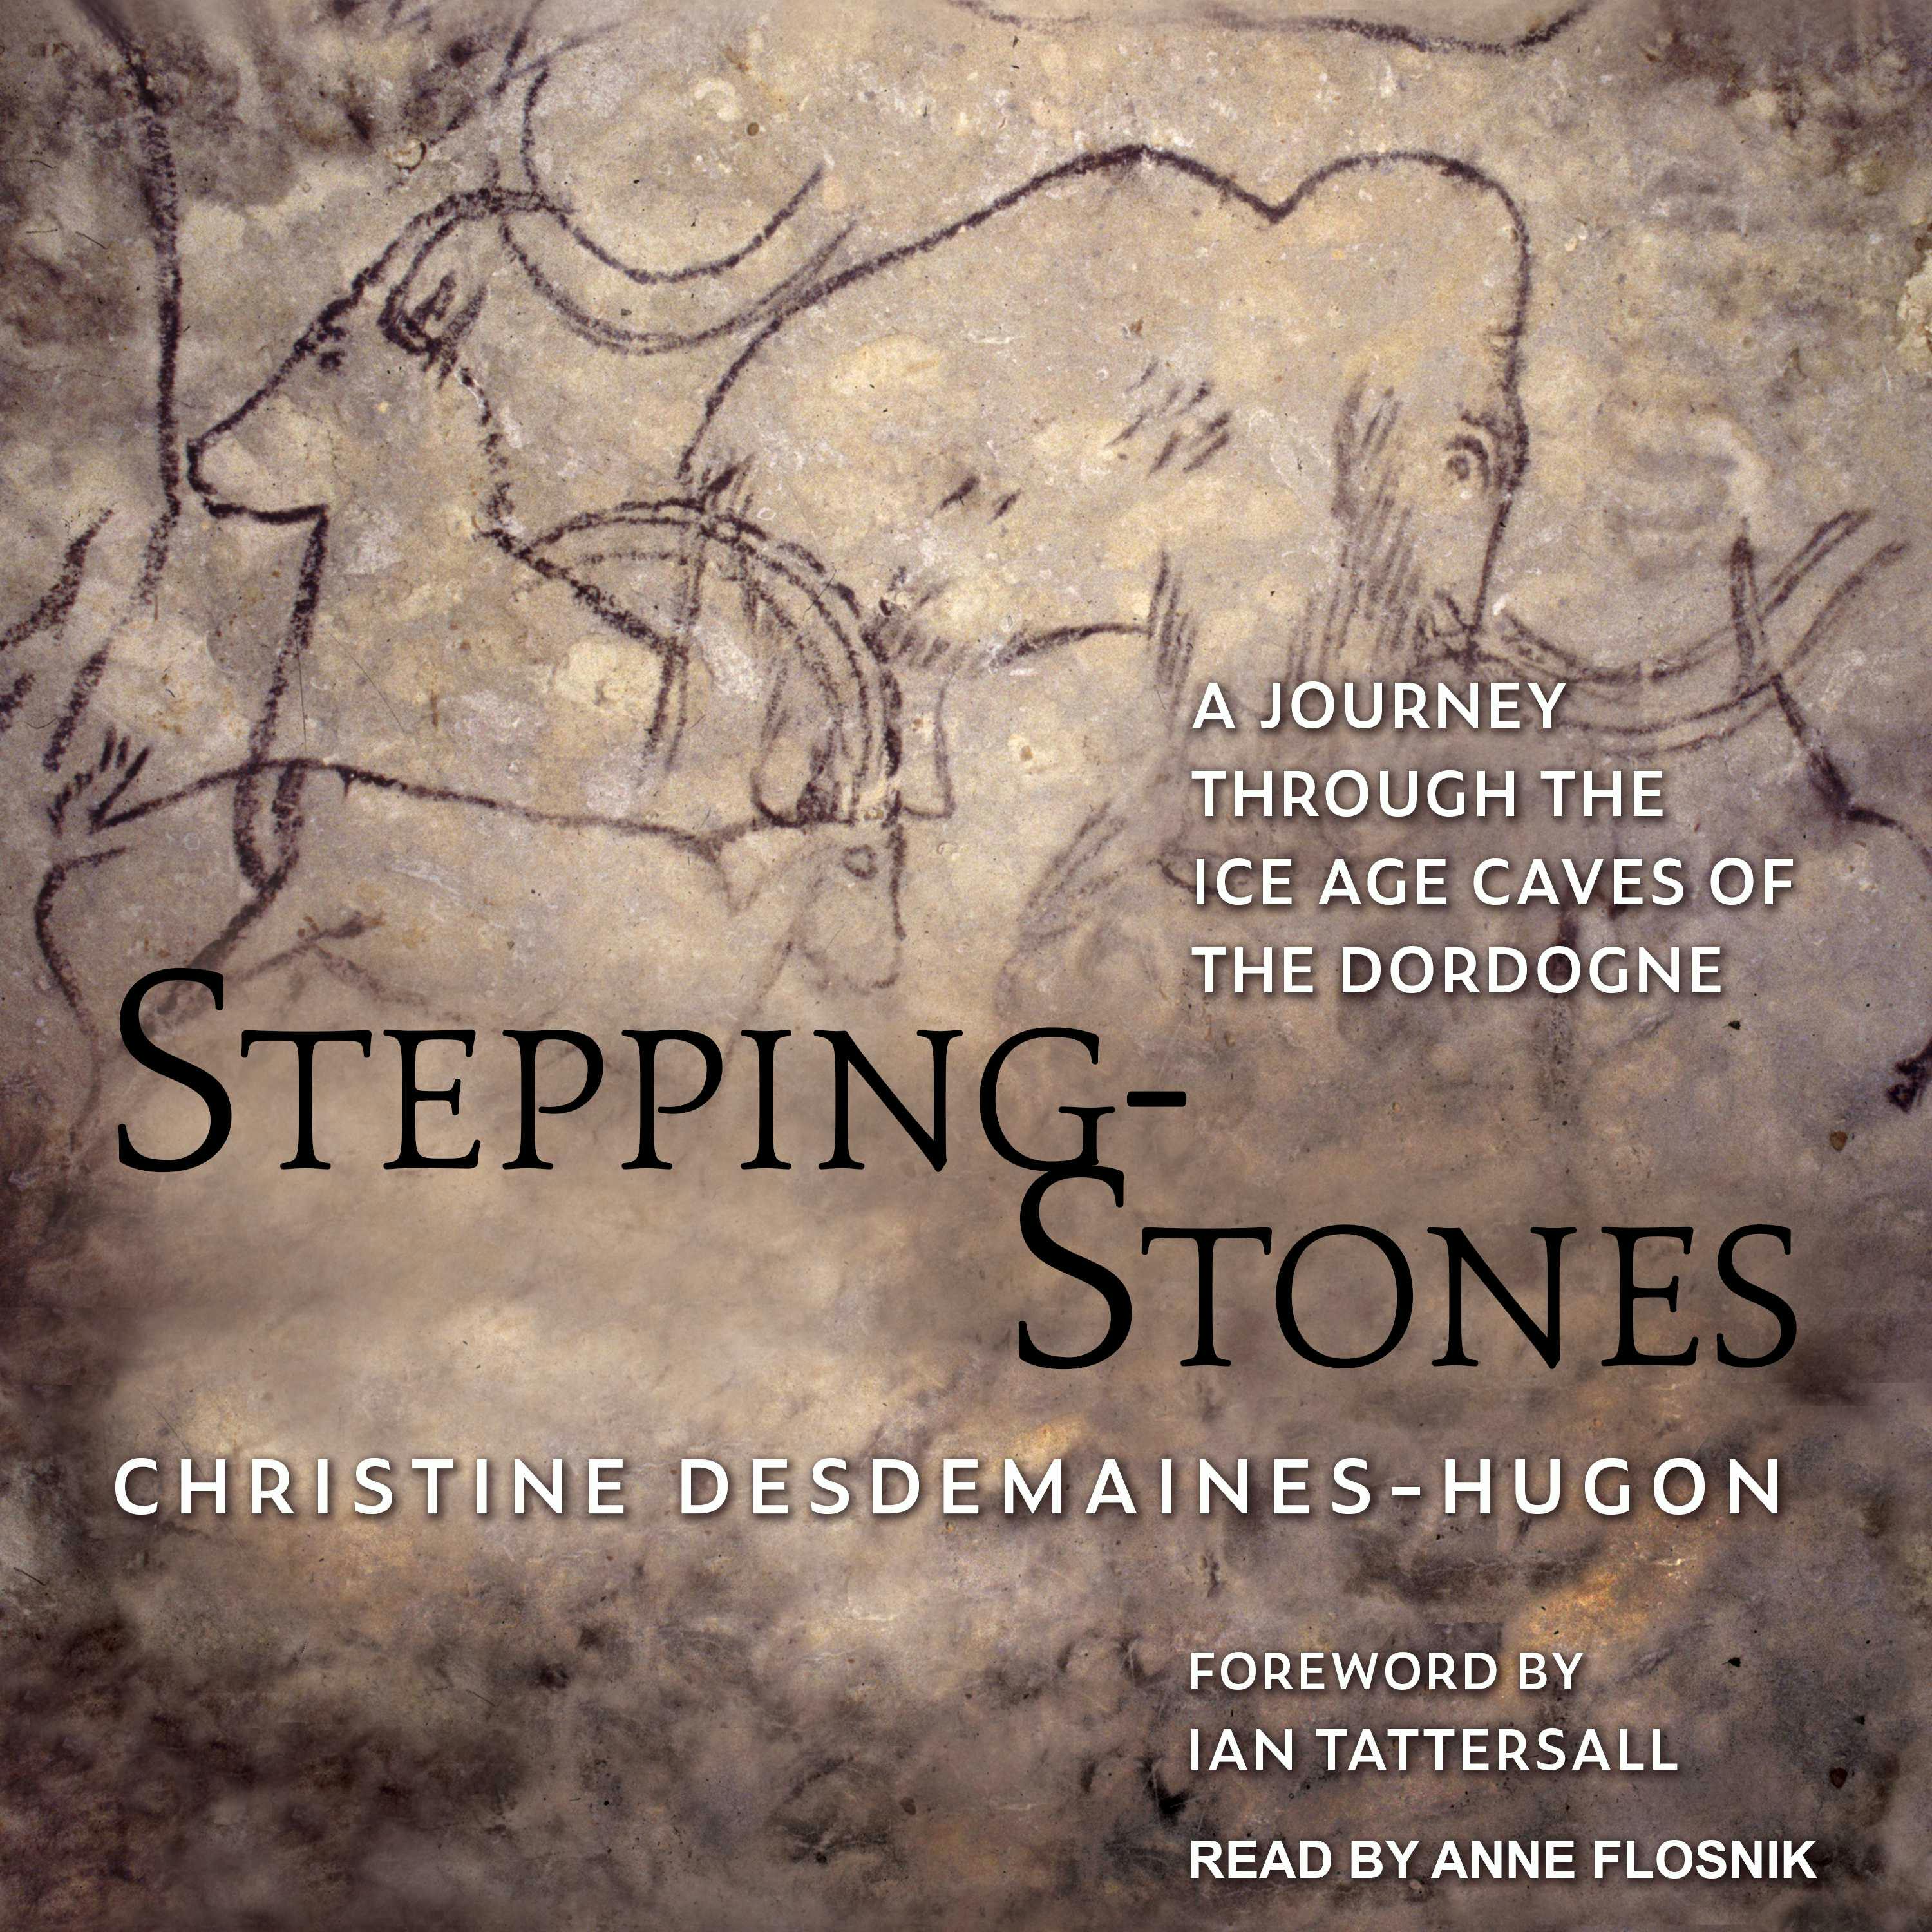 Stepping-Stones: A Journey Through The Ice Age Caves Of The Dordogne - Ian Tattersall, Christine Desdemaines-Hugon